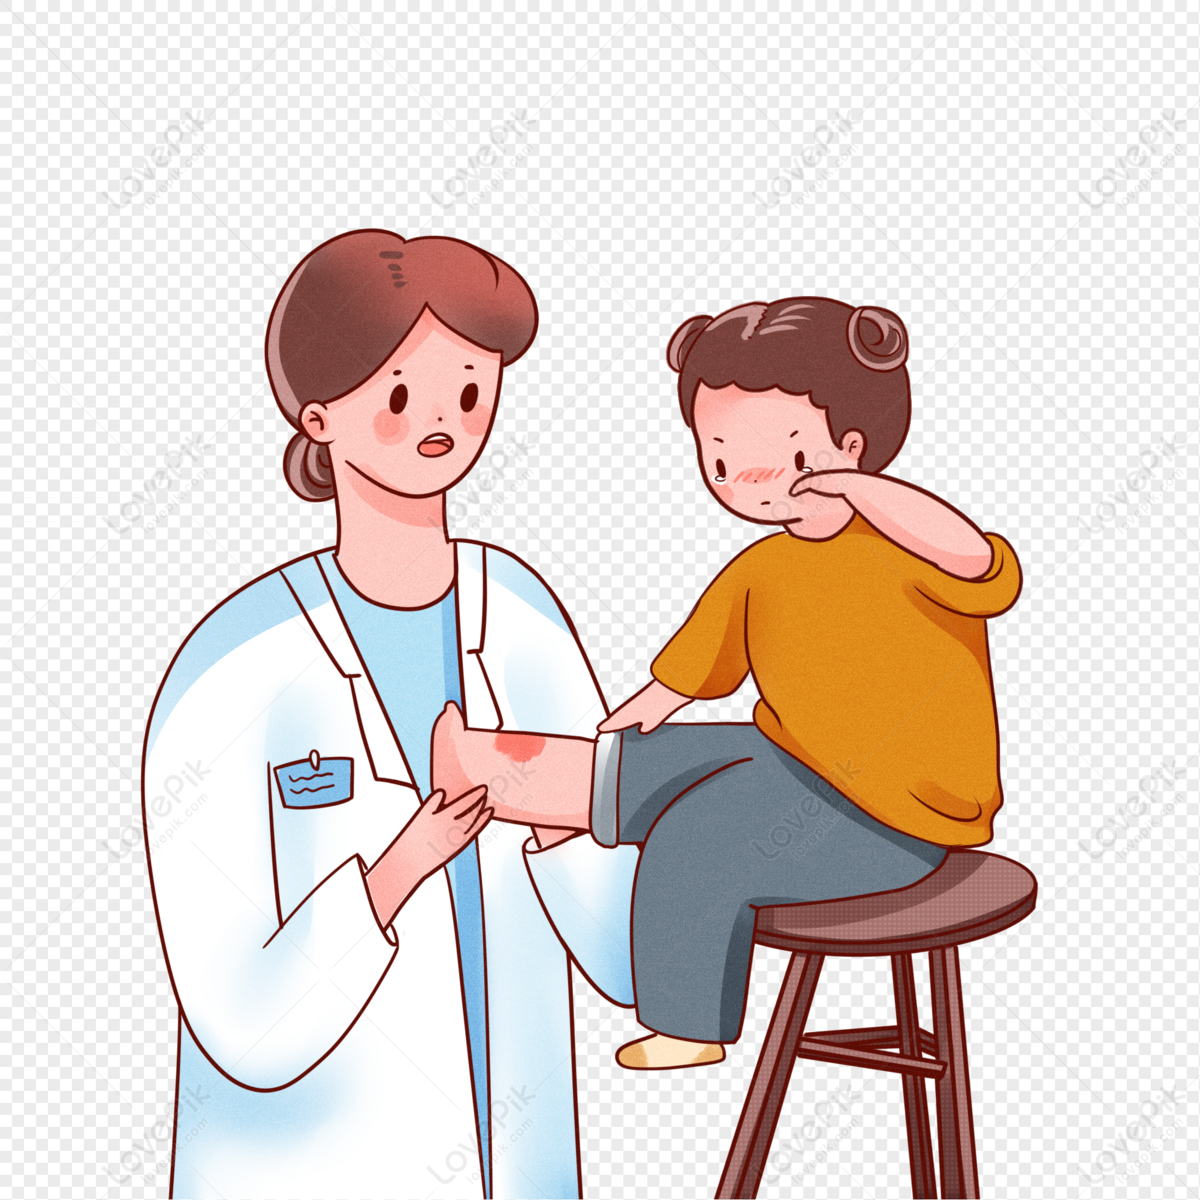 see a doctor clipart pictures